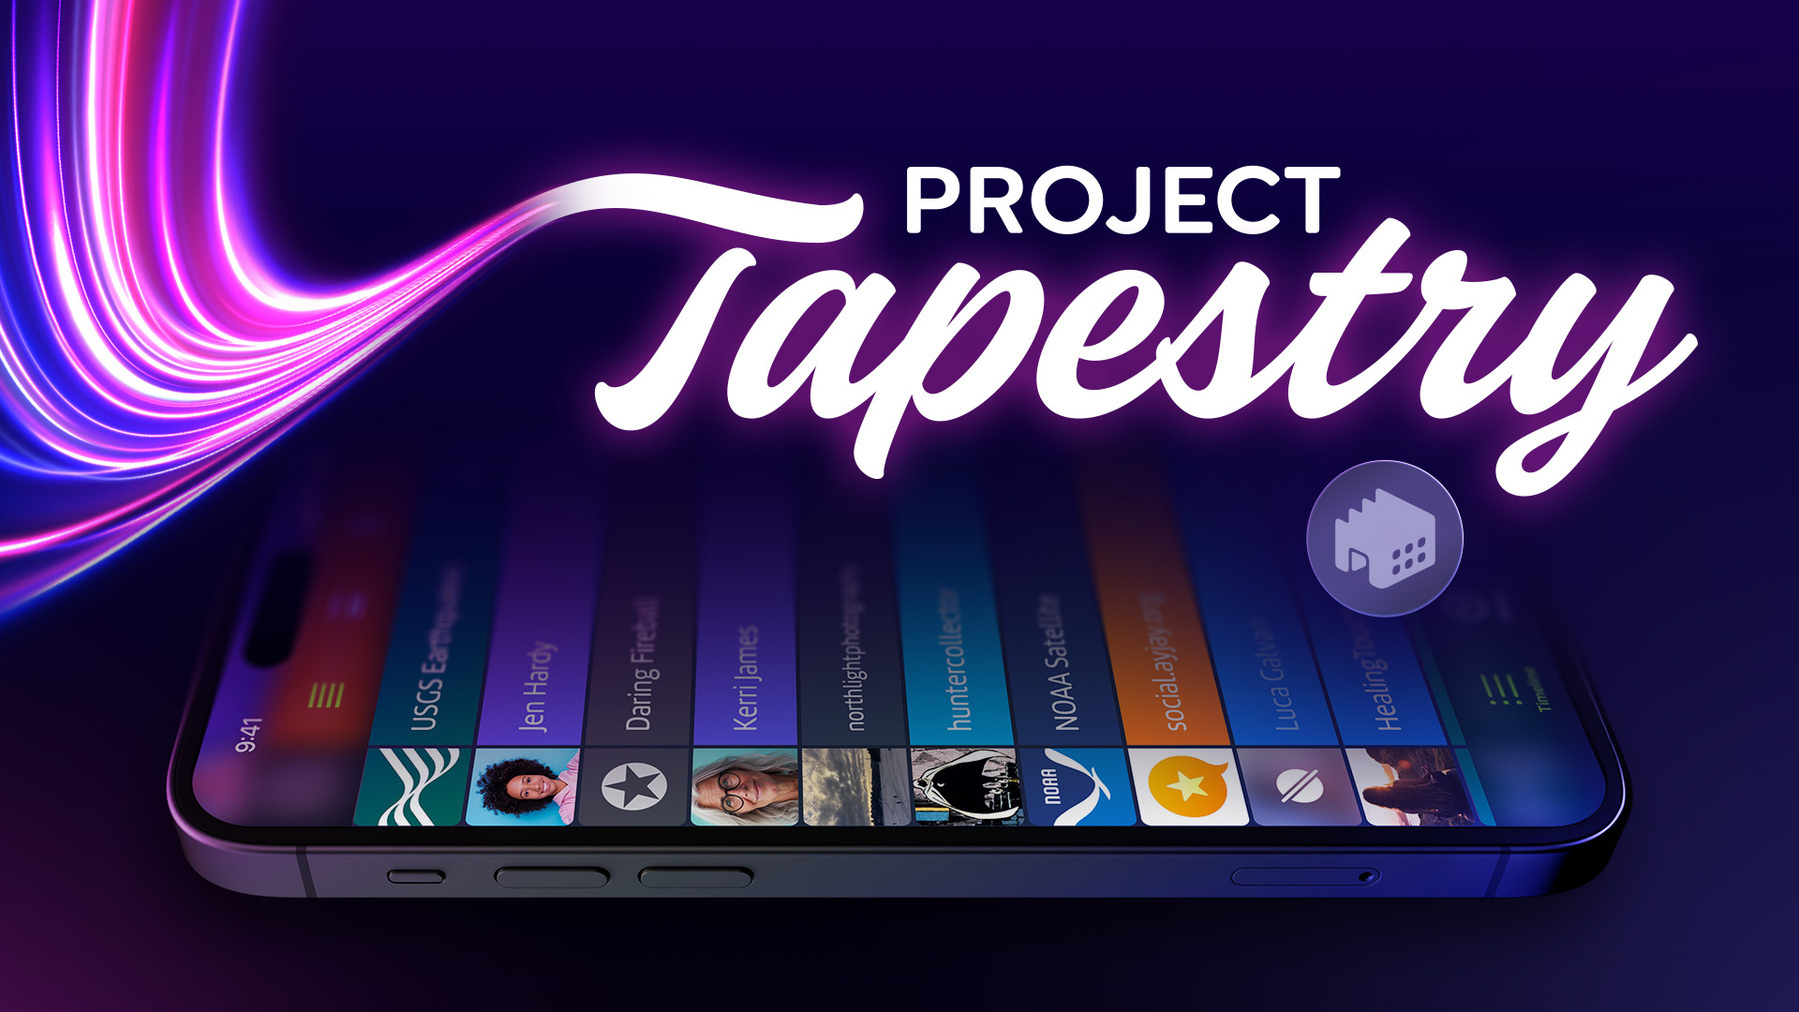 Project Tapestry by Iconfactory, promotional image